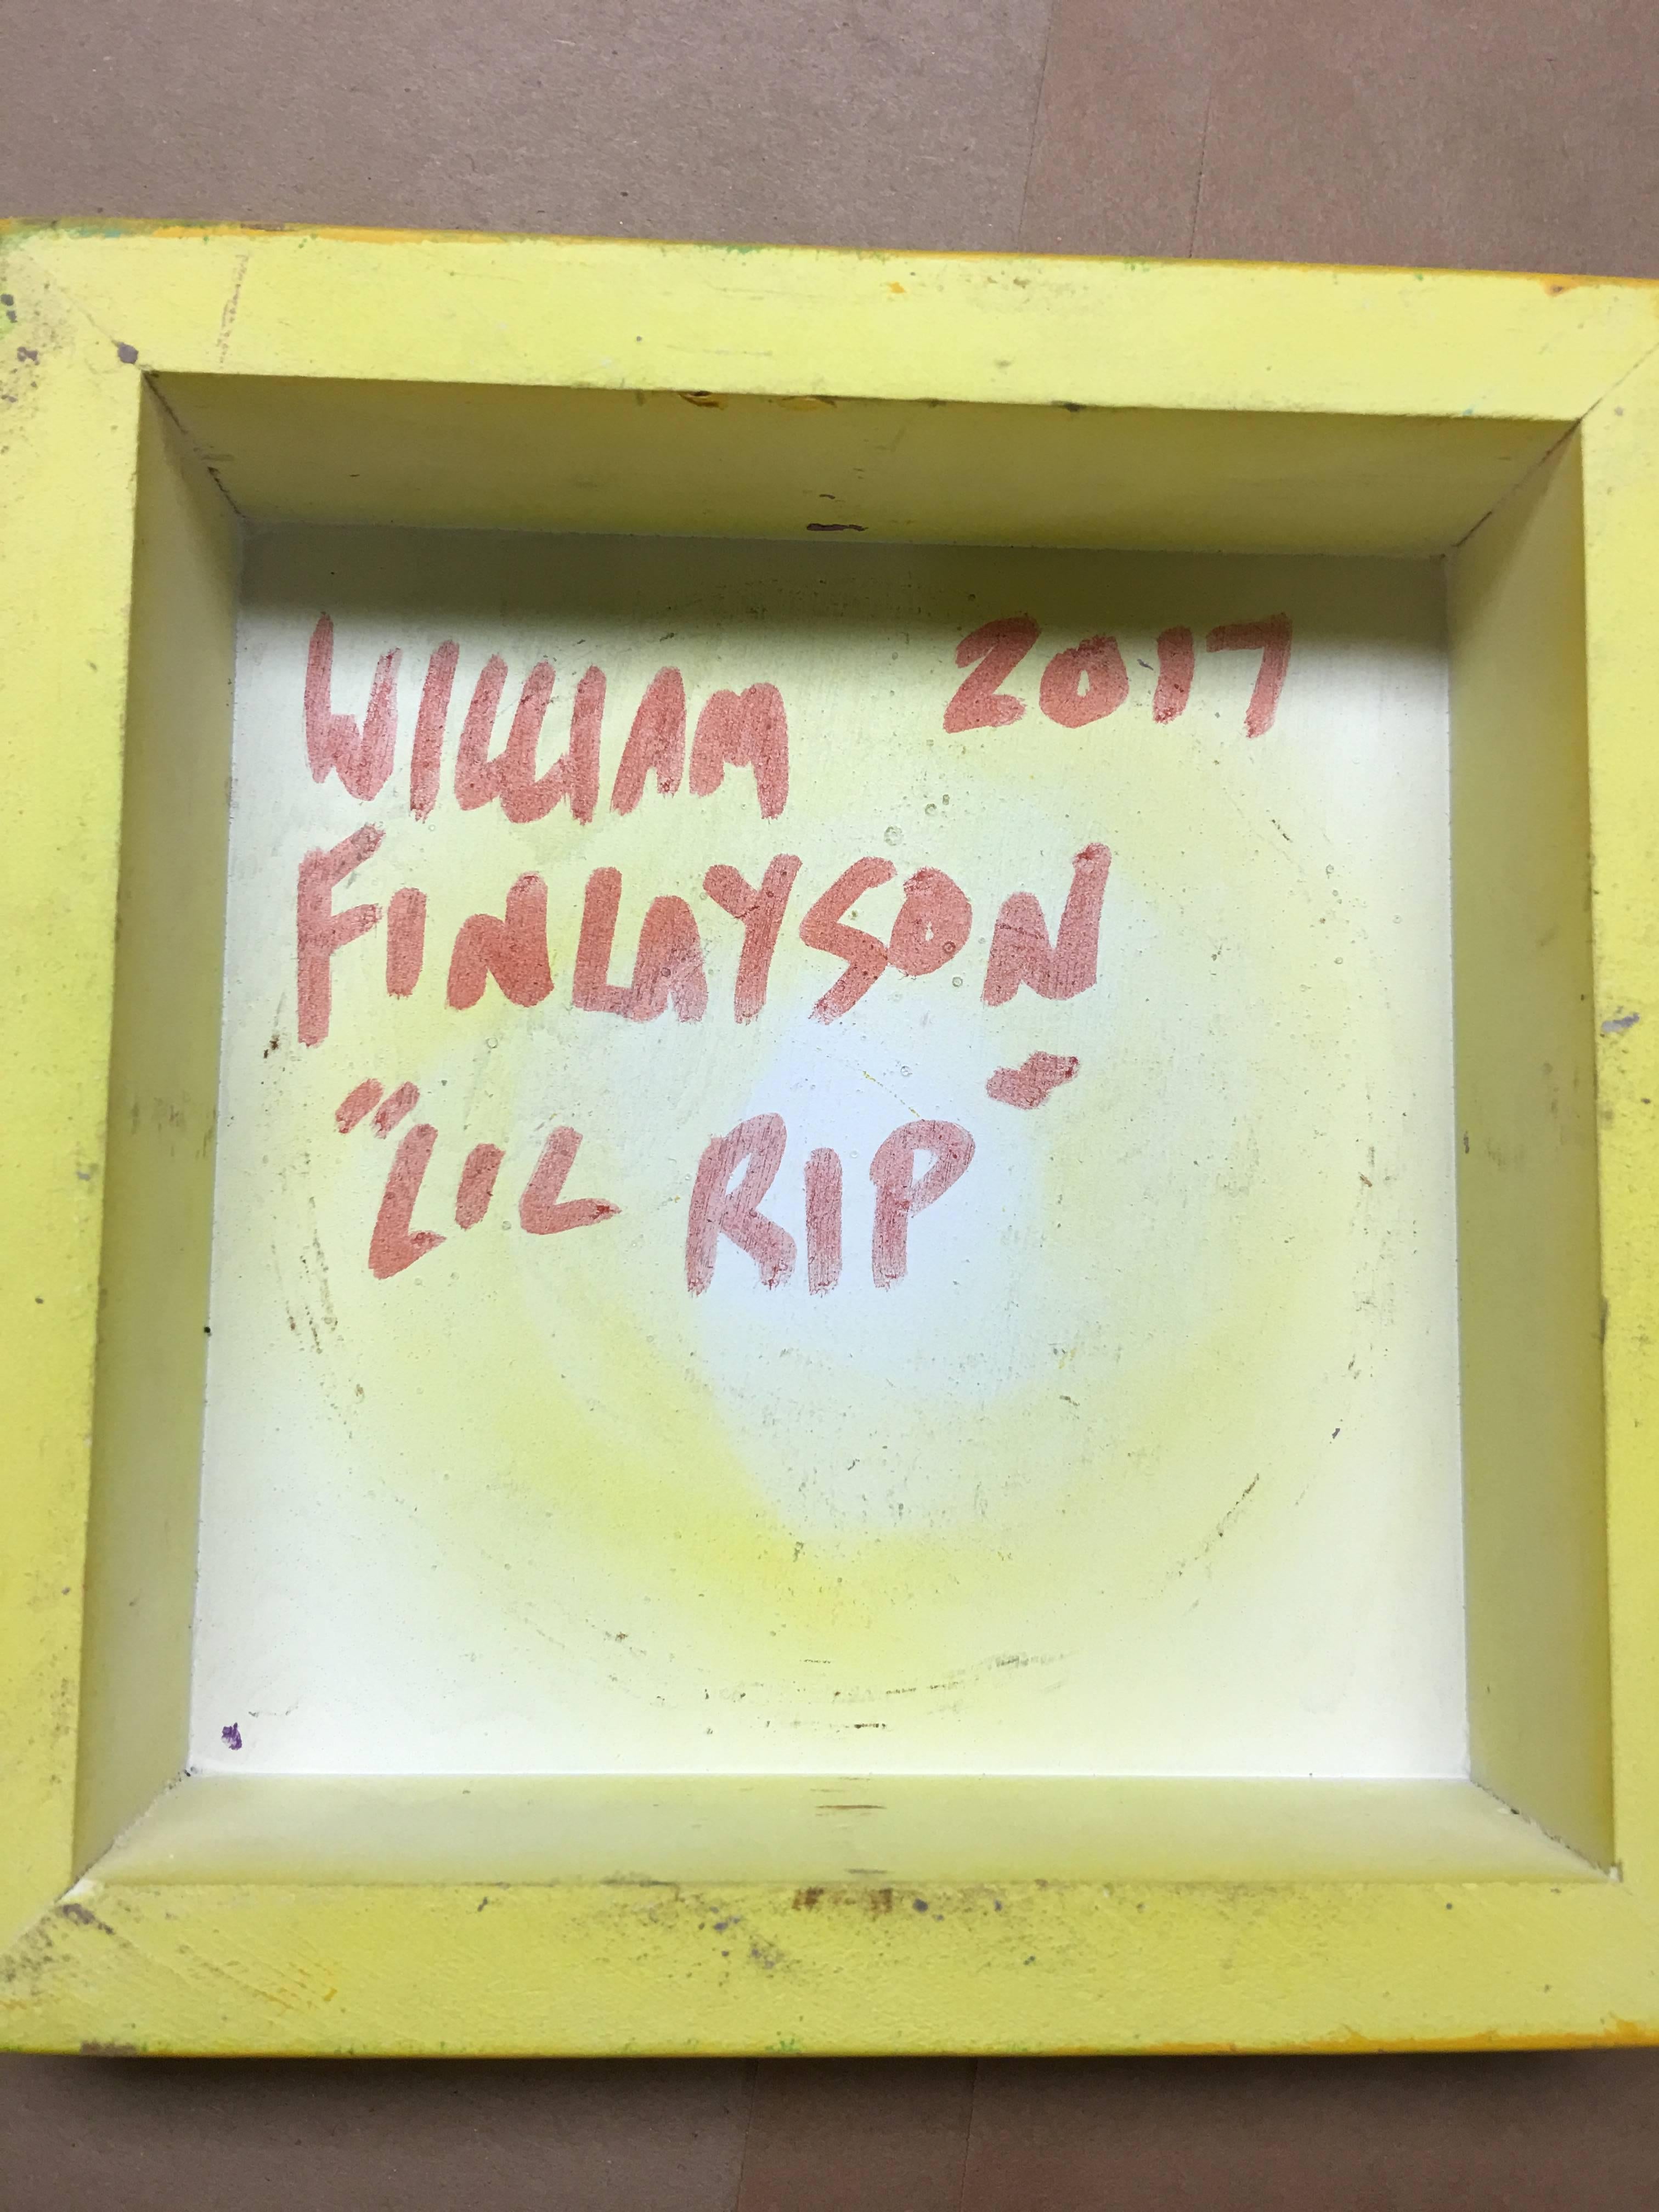 Lil Rip - Abstract Mixed Media Art by William Finlayson